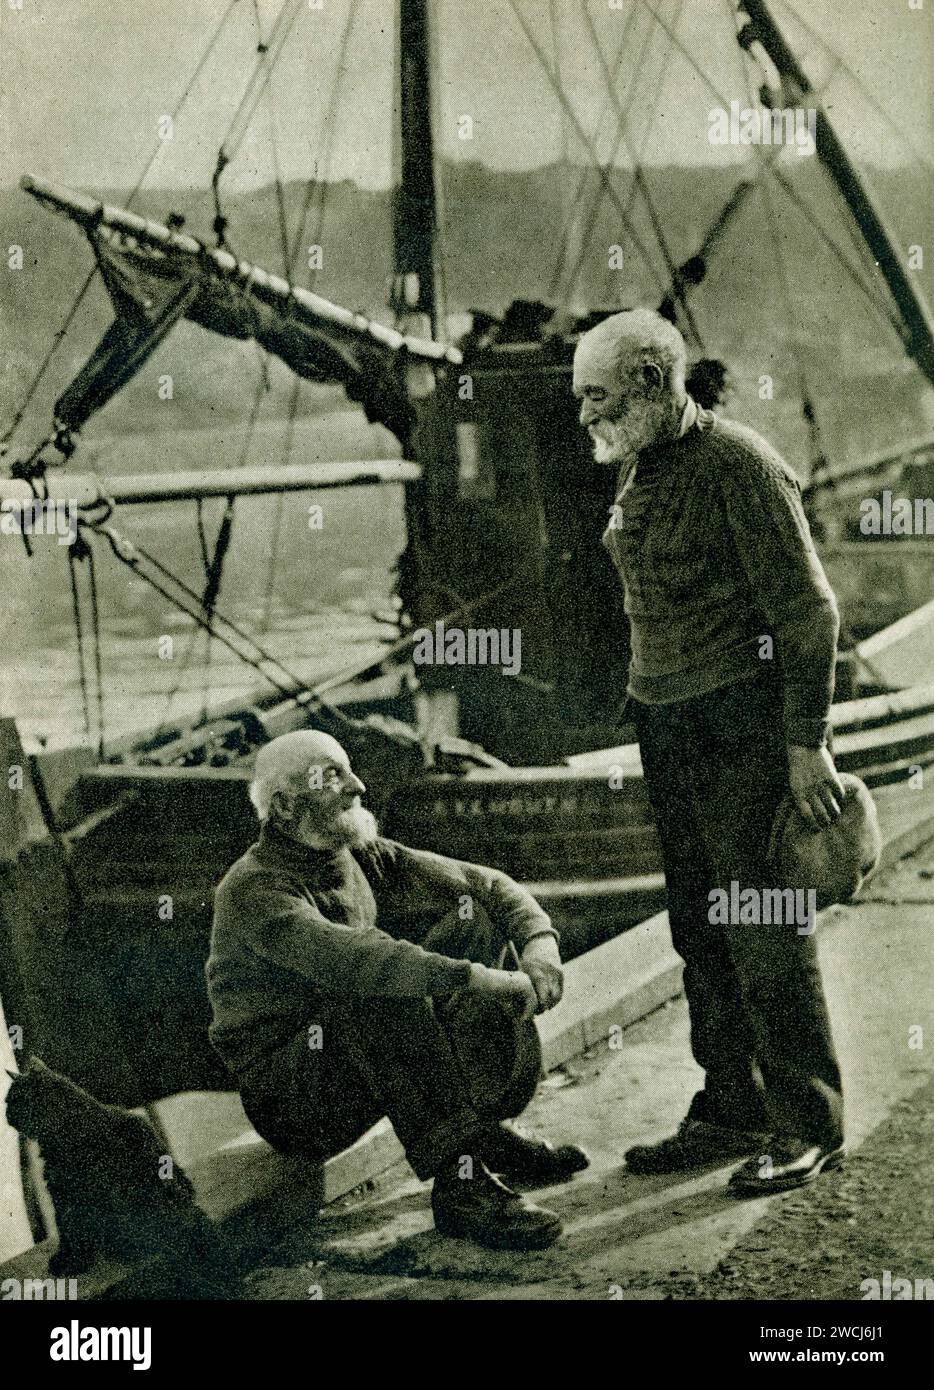 Early 1900's 1930's era photograph of two fishermen of Eyemouth, chatting on the quayside, from the book 'In Scotland Again' by H. V. Morton. (first pub 26 Oct. 1933) Eyemouth, Berwickshire, Scotland,  U.K. Stock Photo